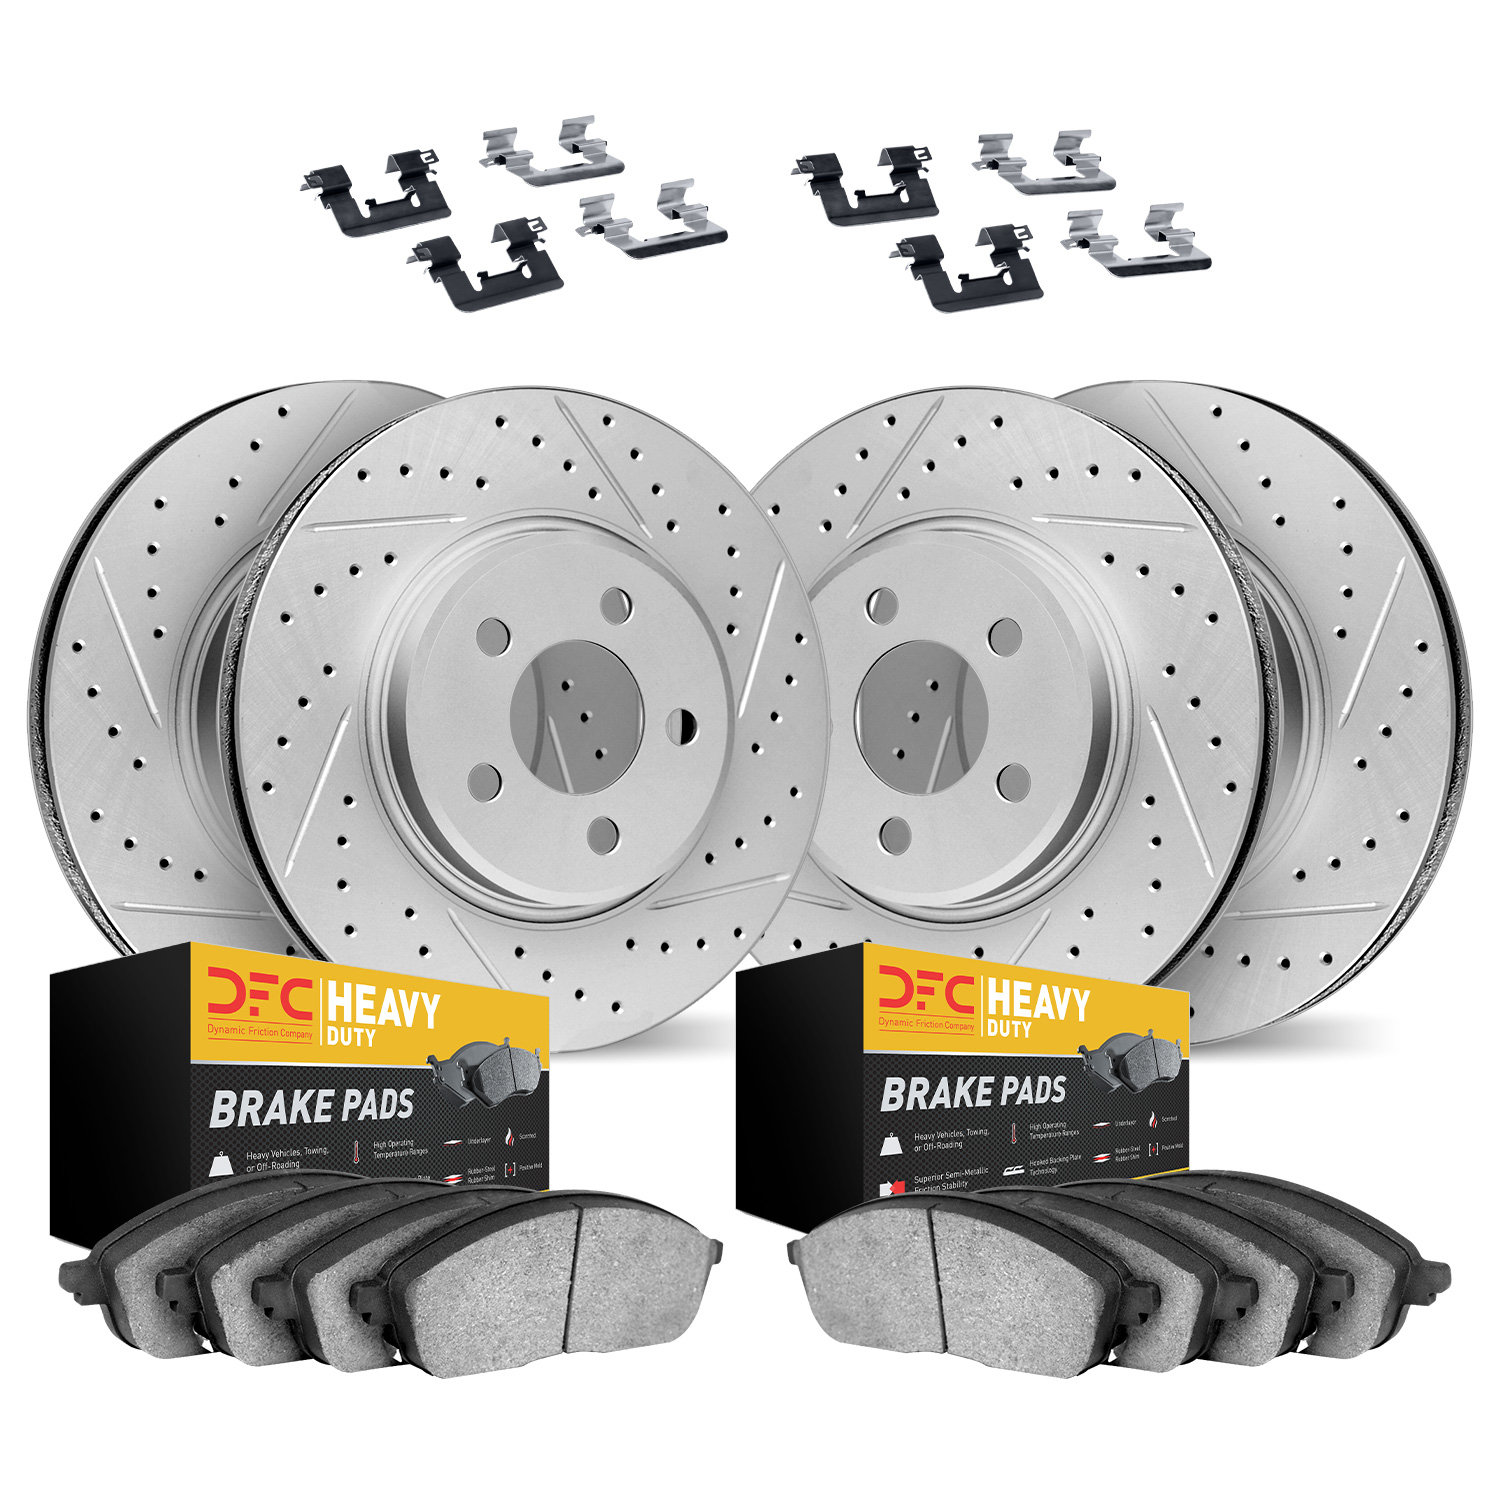 2214-39018 Geoperformance Drilled/Slotted Rotors w/Heavy-Duty Pads Kit & Hardware, 2006-2014 Mopar, Position: Front and Rear